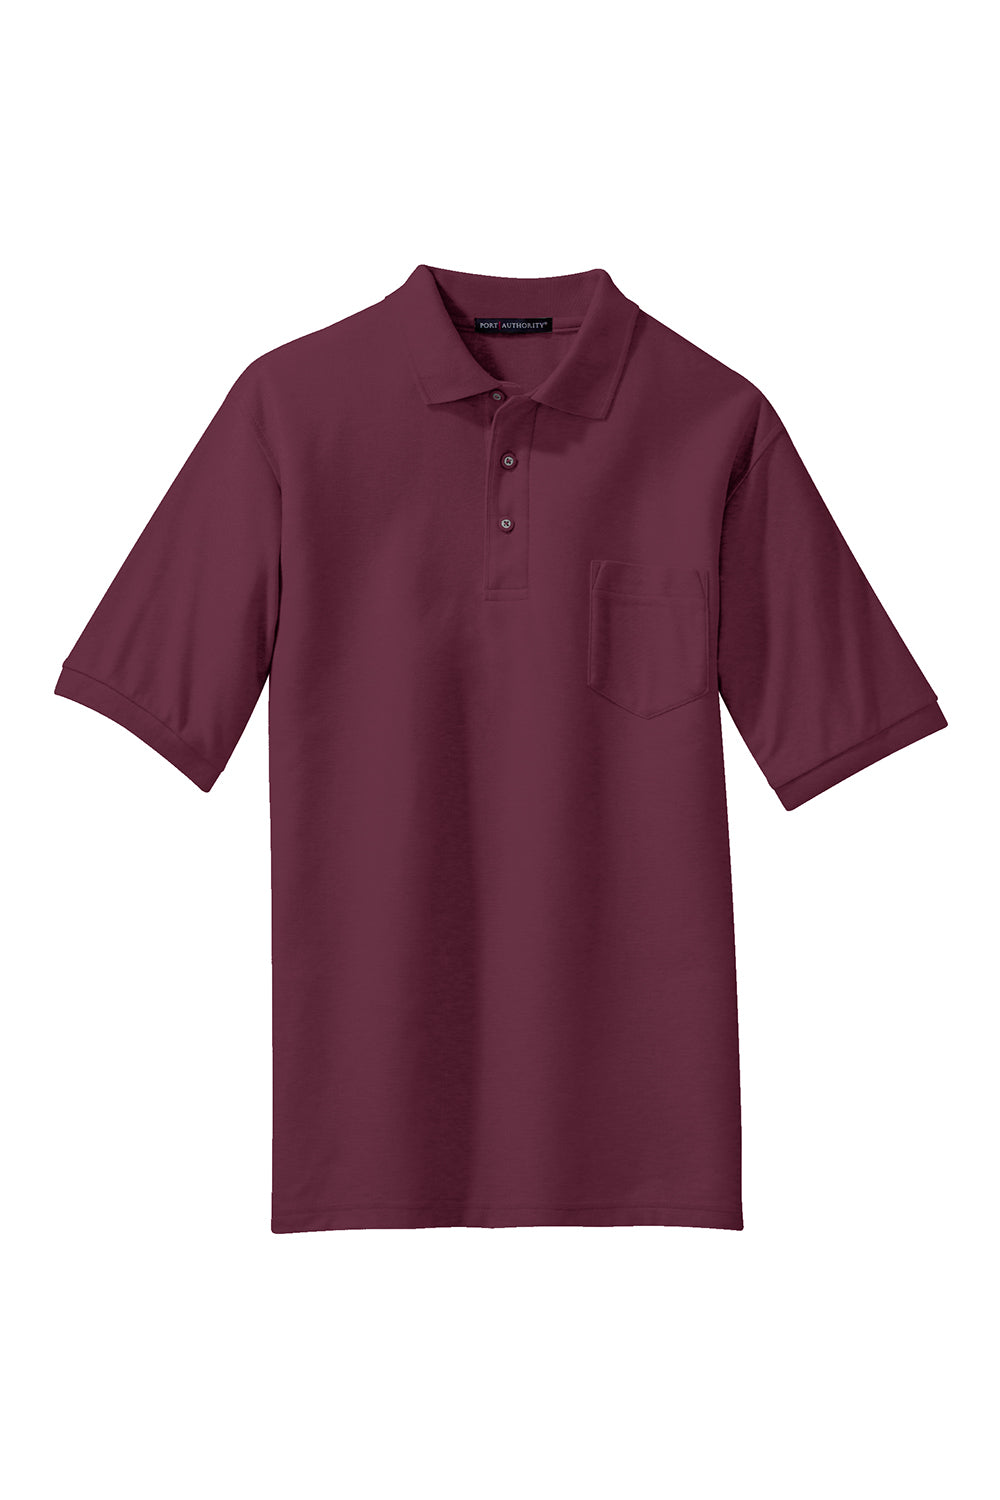 Port Authority K500P Mens Silk Touch Wrinkle Resistant Short Sleeve Polo Shirt w/ Pocket Burgundy Flat Front